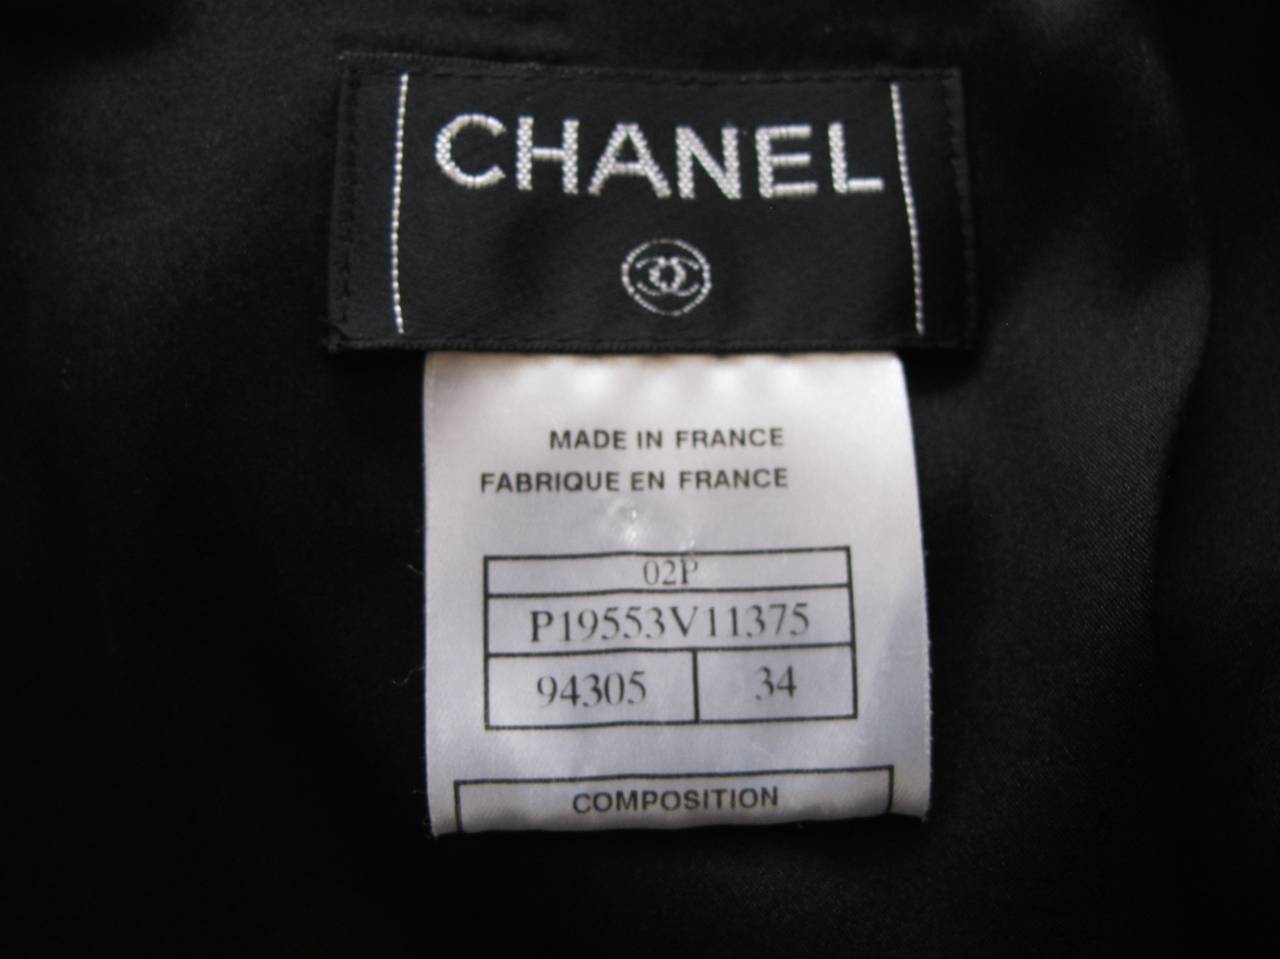 Chanel Black Satin Skirt with Iconic Black Quilting on Top of Skirt For Sale 5